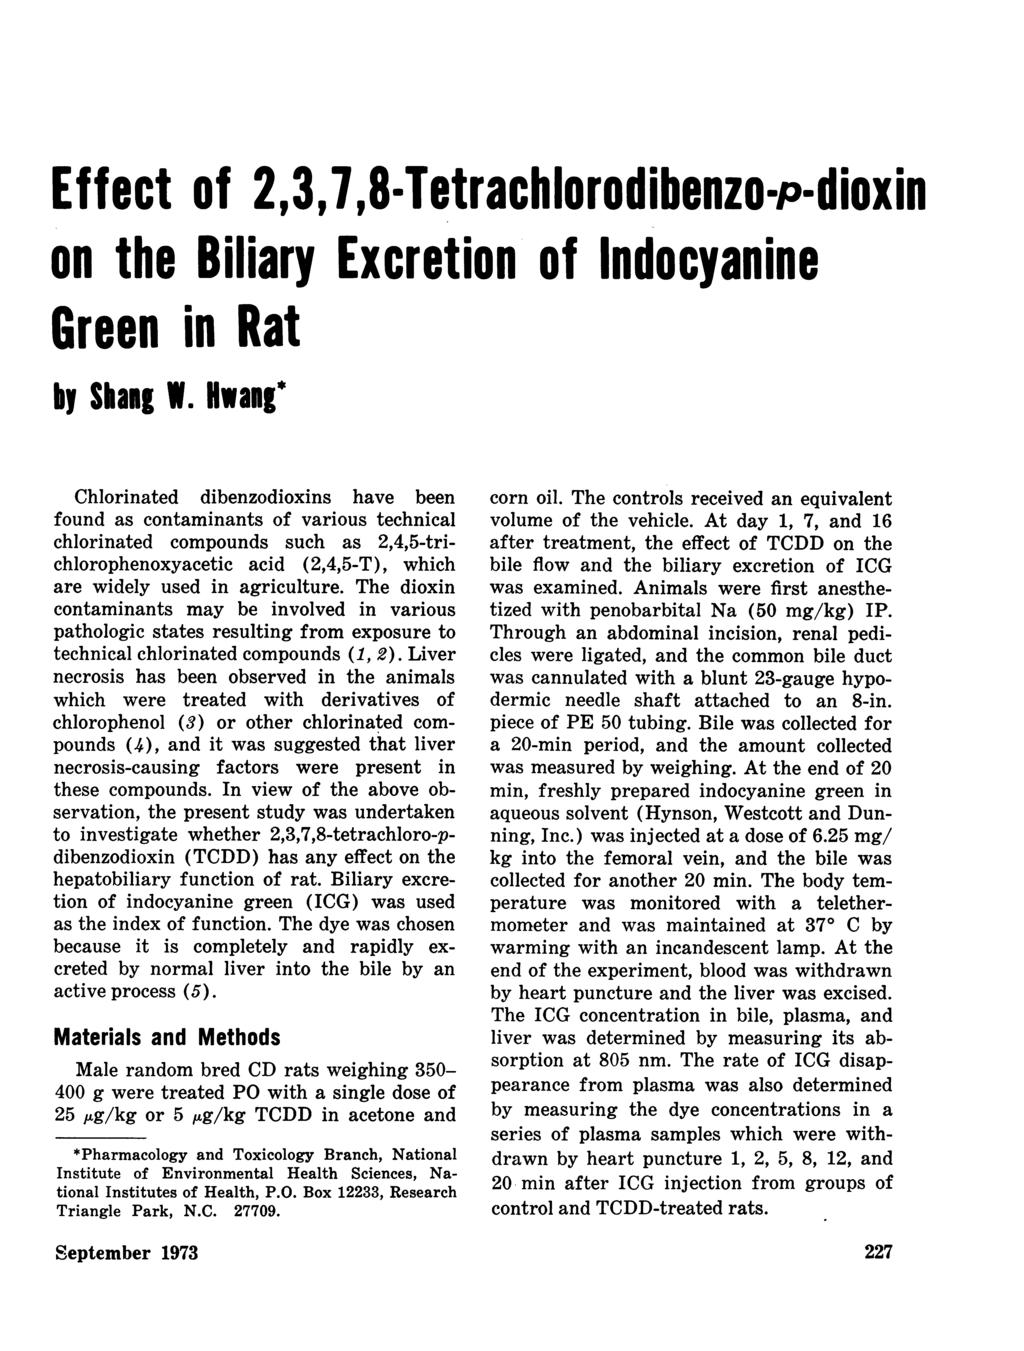 Effect of 2,3,7,8-Tetrachlorodibenzo-p-dioxin on the Biliary Excretion of Indocyanine Green in Rat by Slang W1.